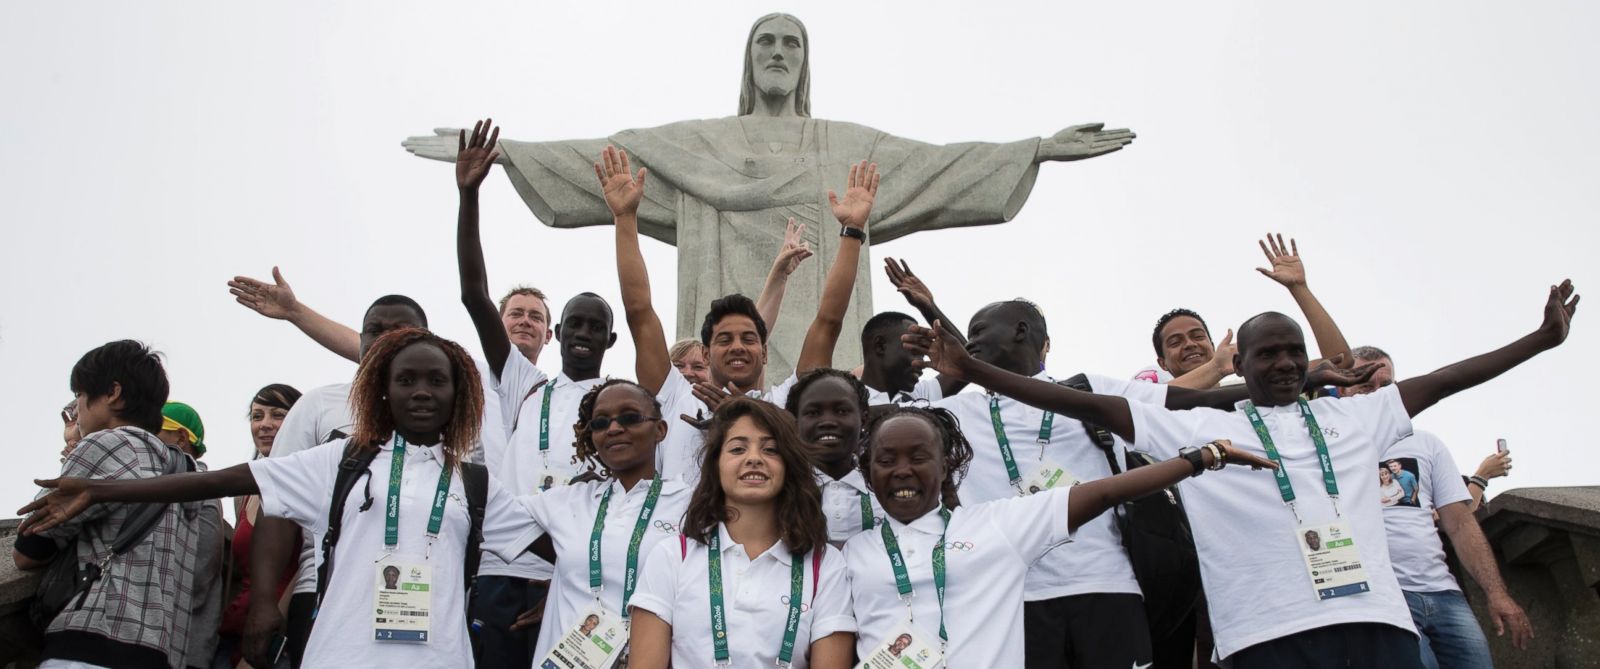 Athletes of the Refugee Olympic Team take pictures with a staff member in front of the statue of Christ the Redeemer